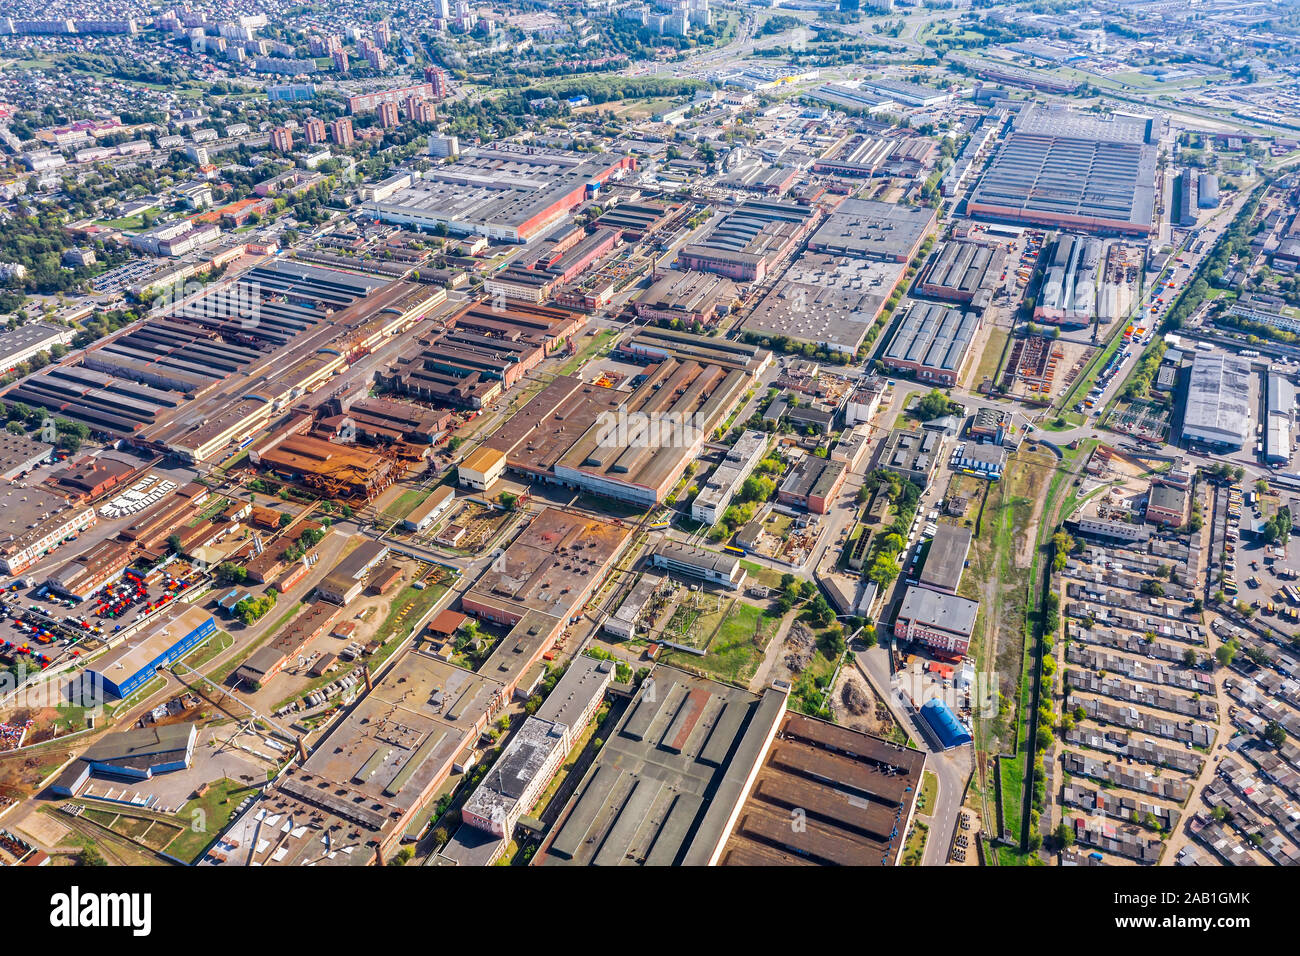 aerial view of factory or plant industrial area with many industrial buildings in city outskirts Stock Photo